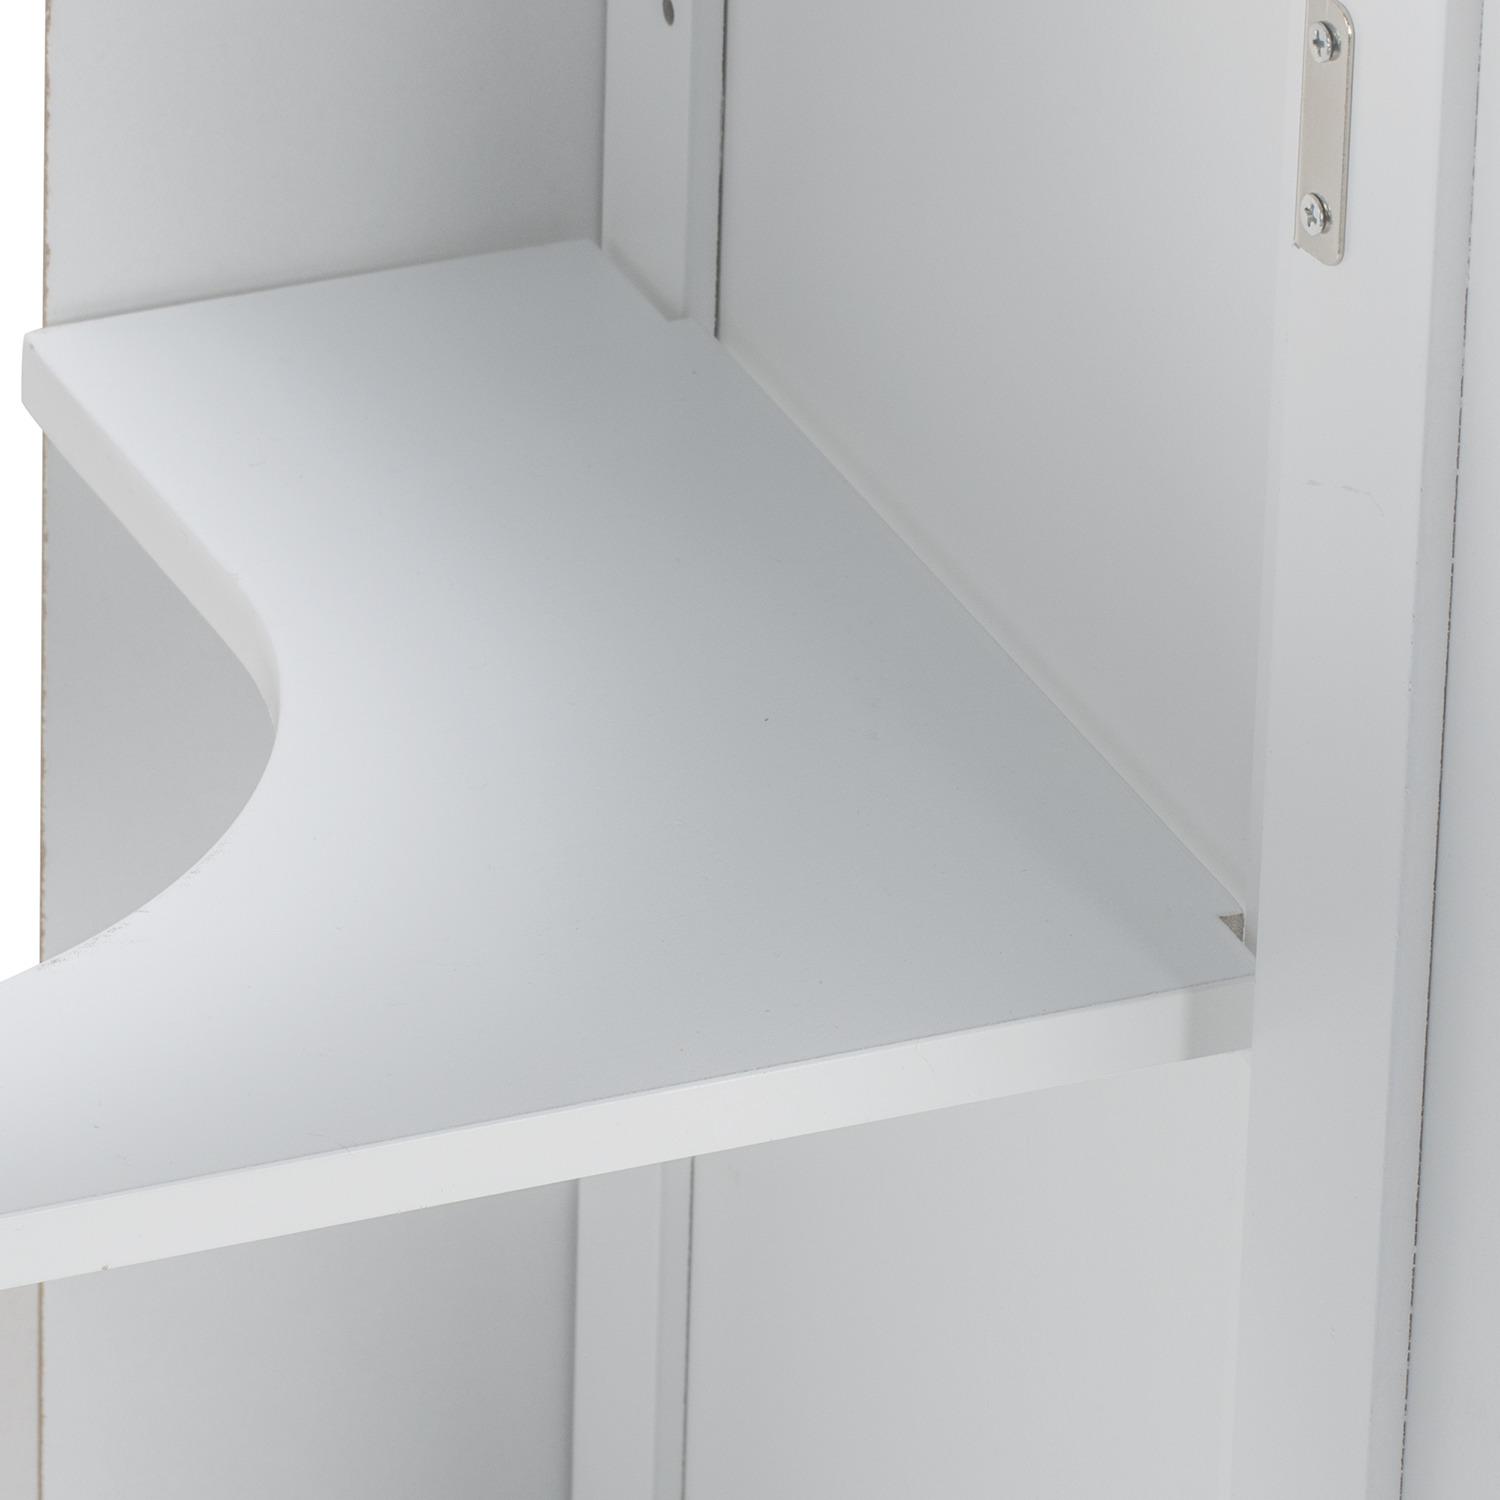 Kingston 2 Door White Sink Console Image 2